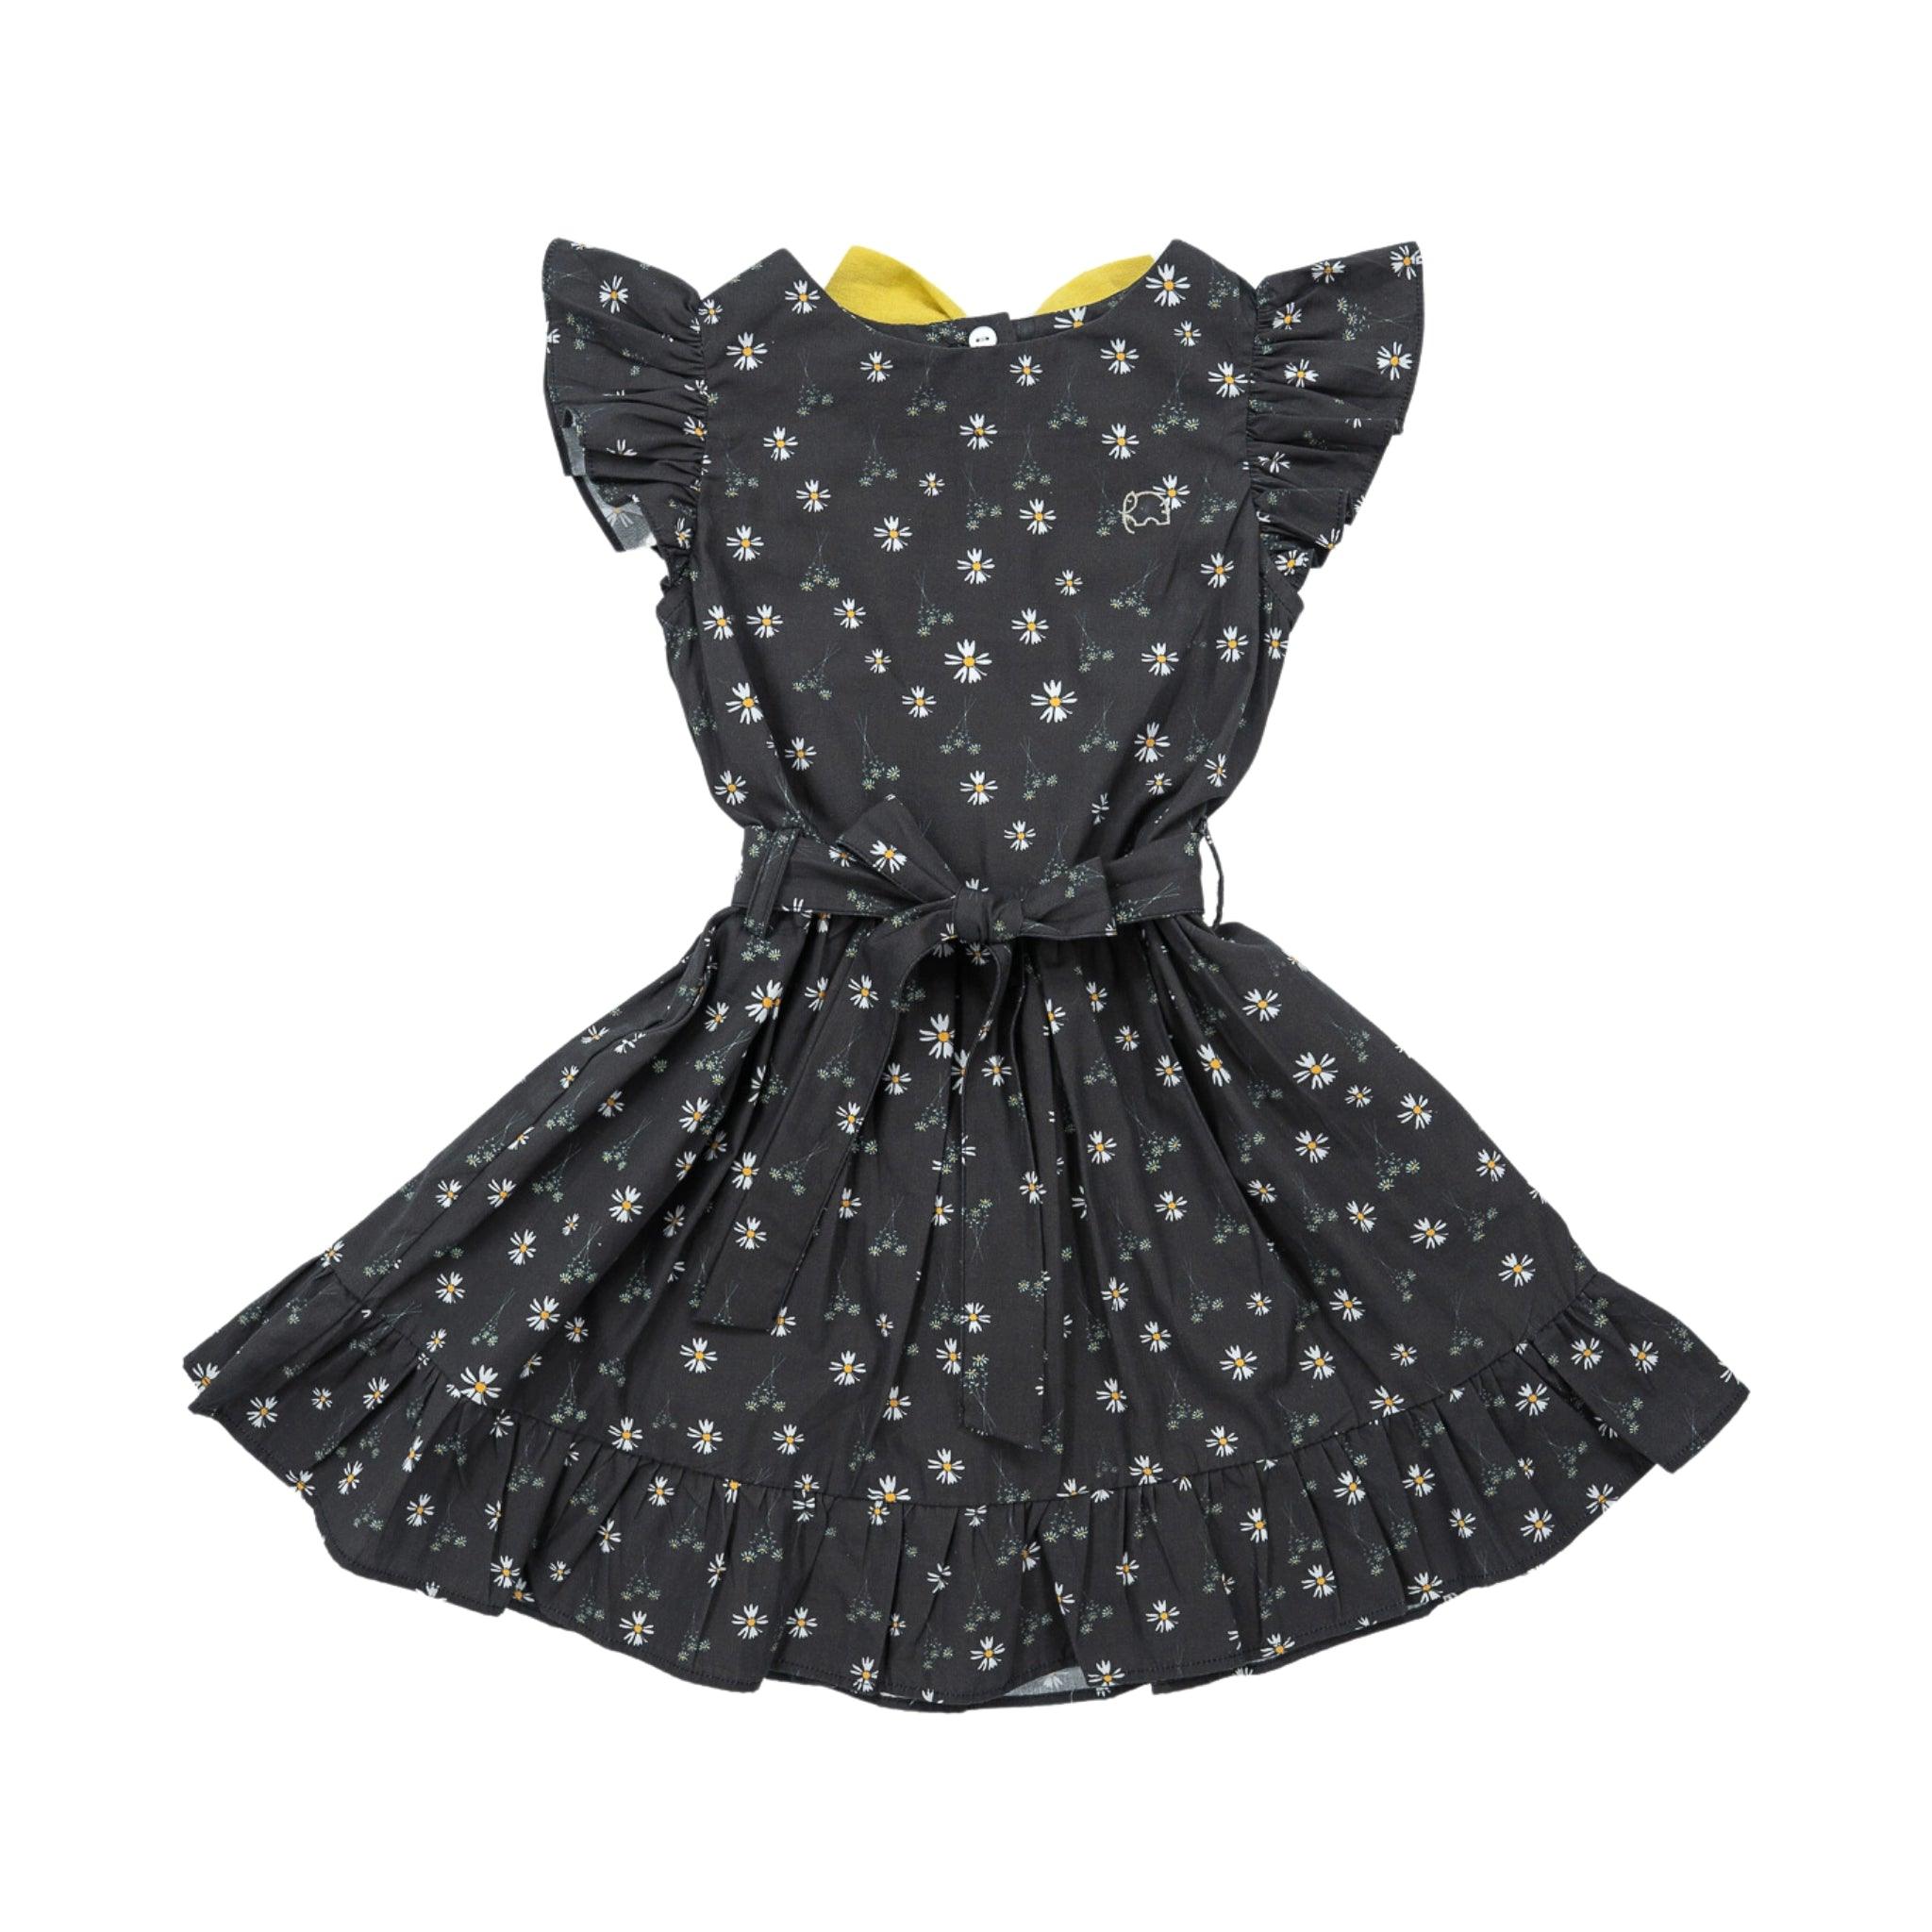 A Petite Blossom Black Cotton Dress by Karee with ruffled sleeves, a belted waist, and a flared skirt, displayed against a white background.